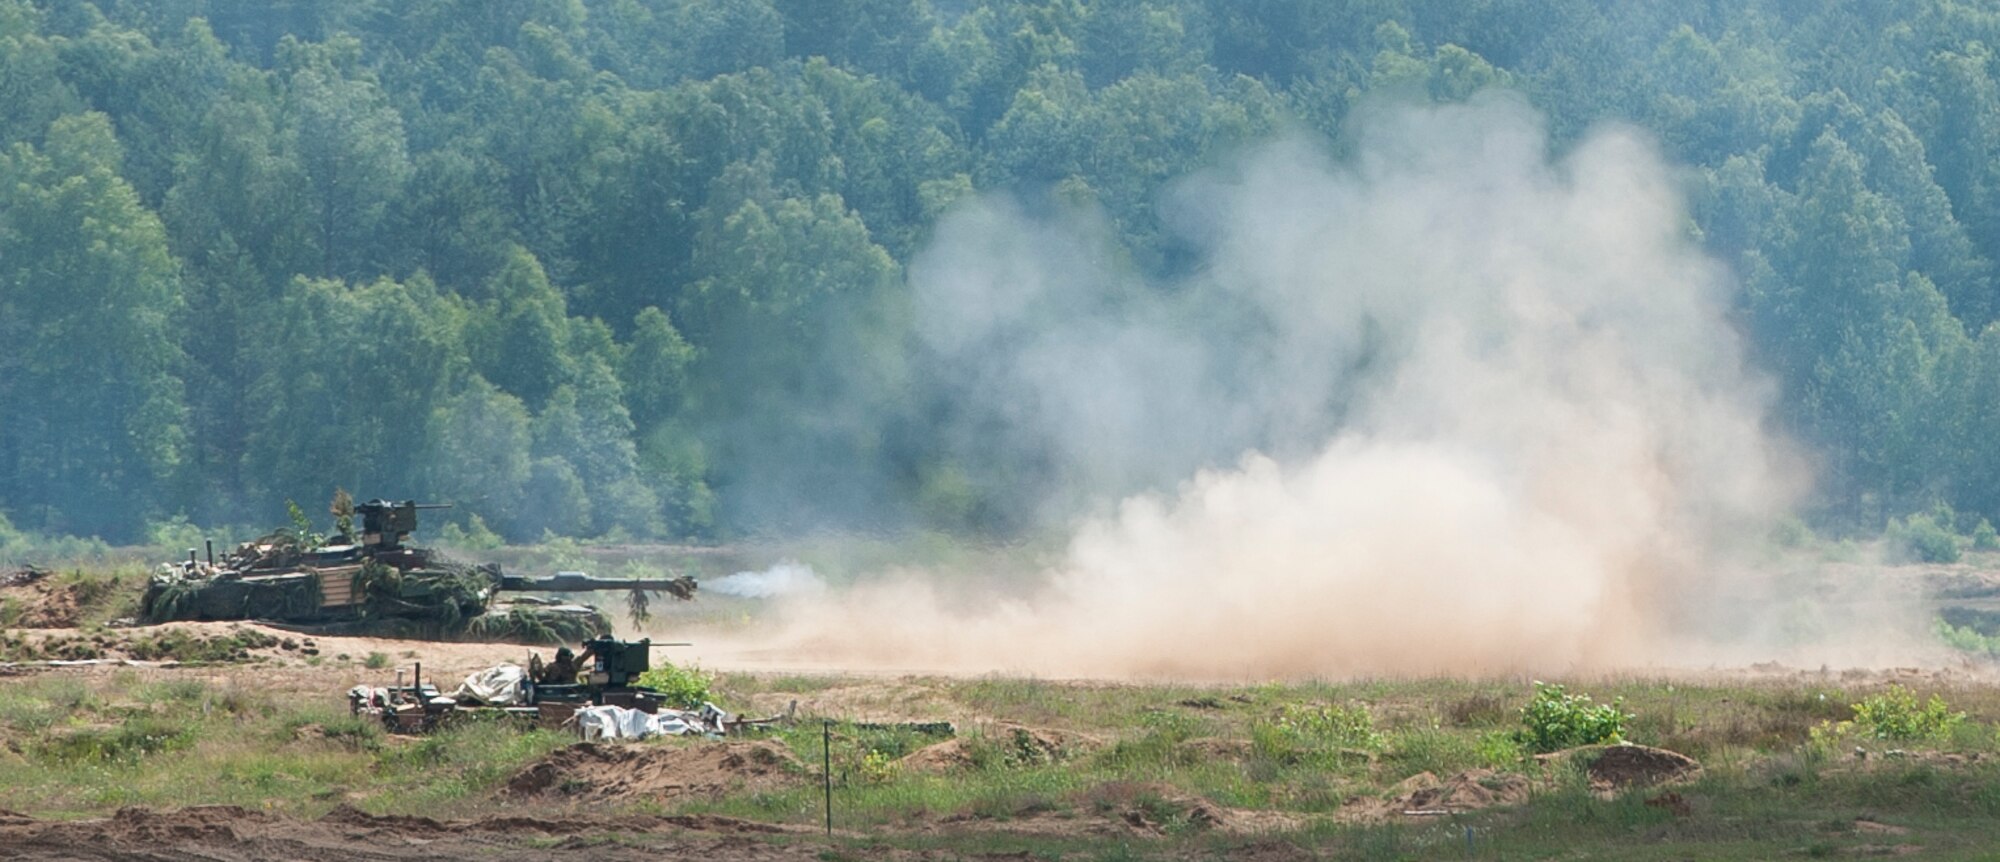 An M1 Abrams tank fires a round as part of a live-fire event during exercise Anakonda 2016 June 16, 2016, in Poland. The event was an opportunity for U.S. Airmen to train alongside allies and test aircraft, vehicles and other equipment in a live fire exercise. The event served as a wrap up for Anakonda 2016, a Polish-led international exercise that aimed to train, exercise and integrate Poland and its allied forces by demonstrating their defense capabilities to deploy in mass numbers and sustain combat power. (U.S. Air Force photo/Airman 1st Class Lane T. Plummer)